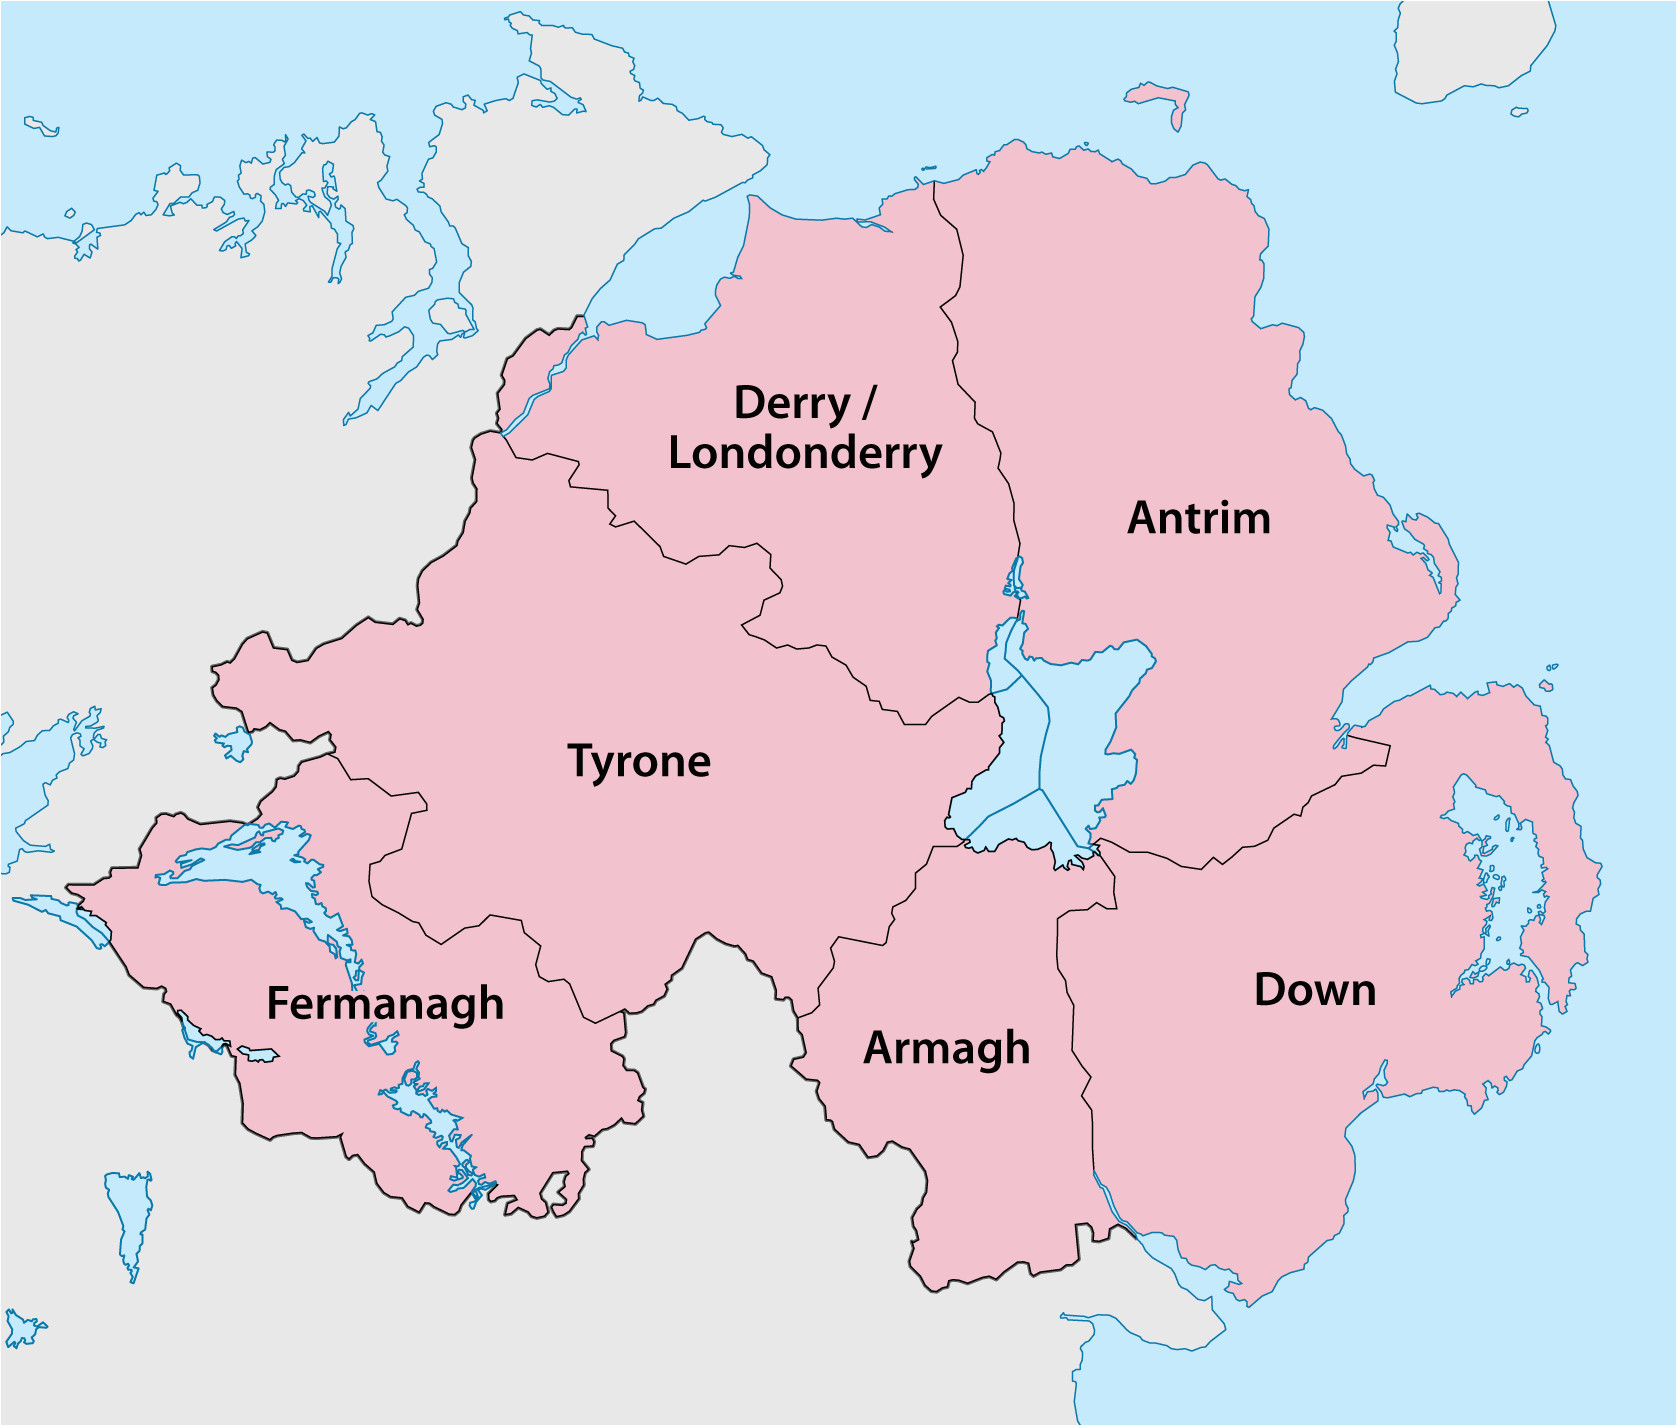 Counties In northern Ireland Map Counties Of northern Ireland Wikipedia